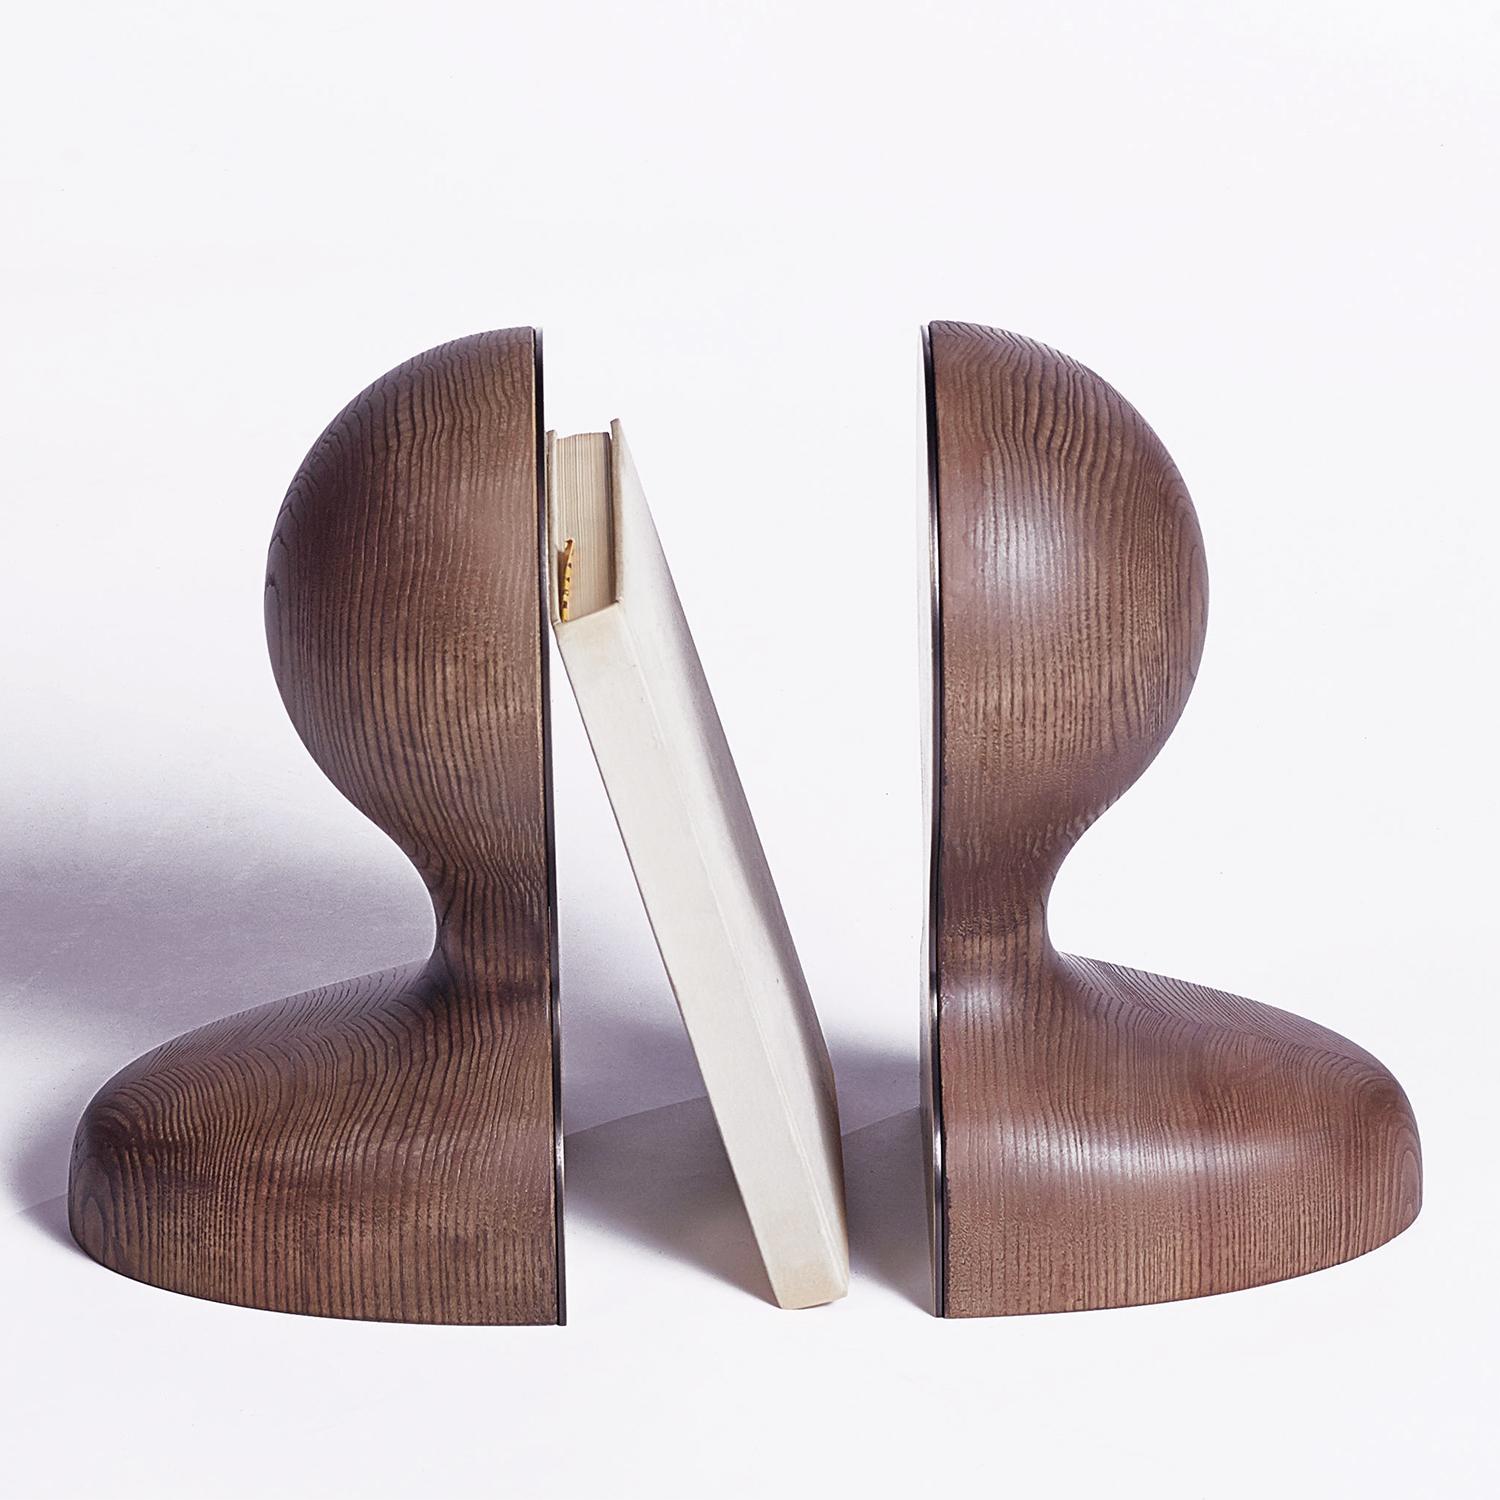 Bookends body parts set of 2 with structure in solid ash
wood in stained walnut finish and with solid brass in brushed
vintage finish. Each piece dimension: L16xD17xH29cm.